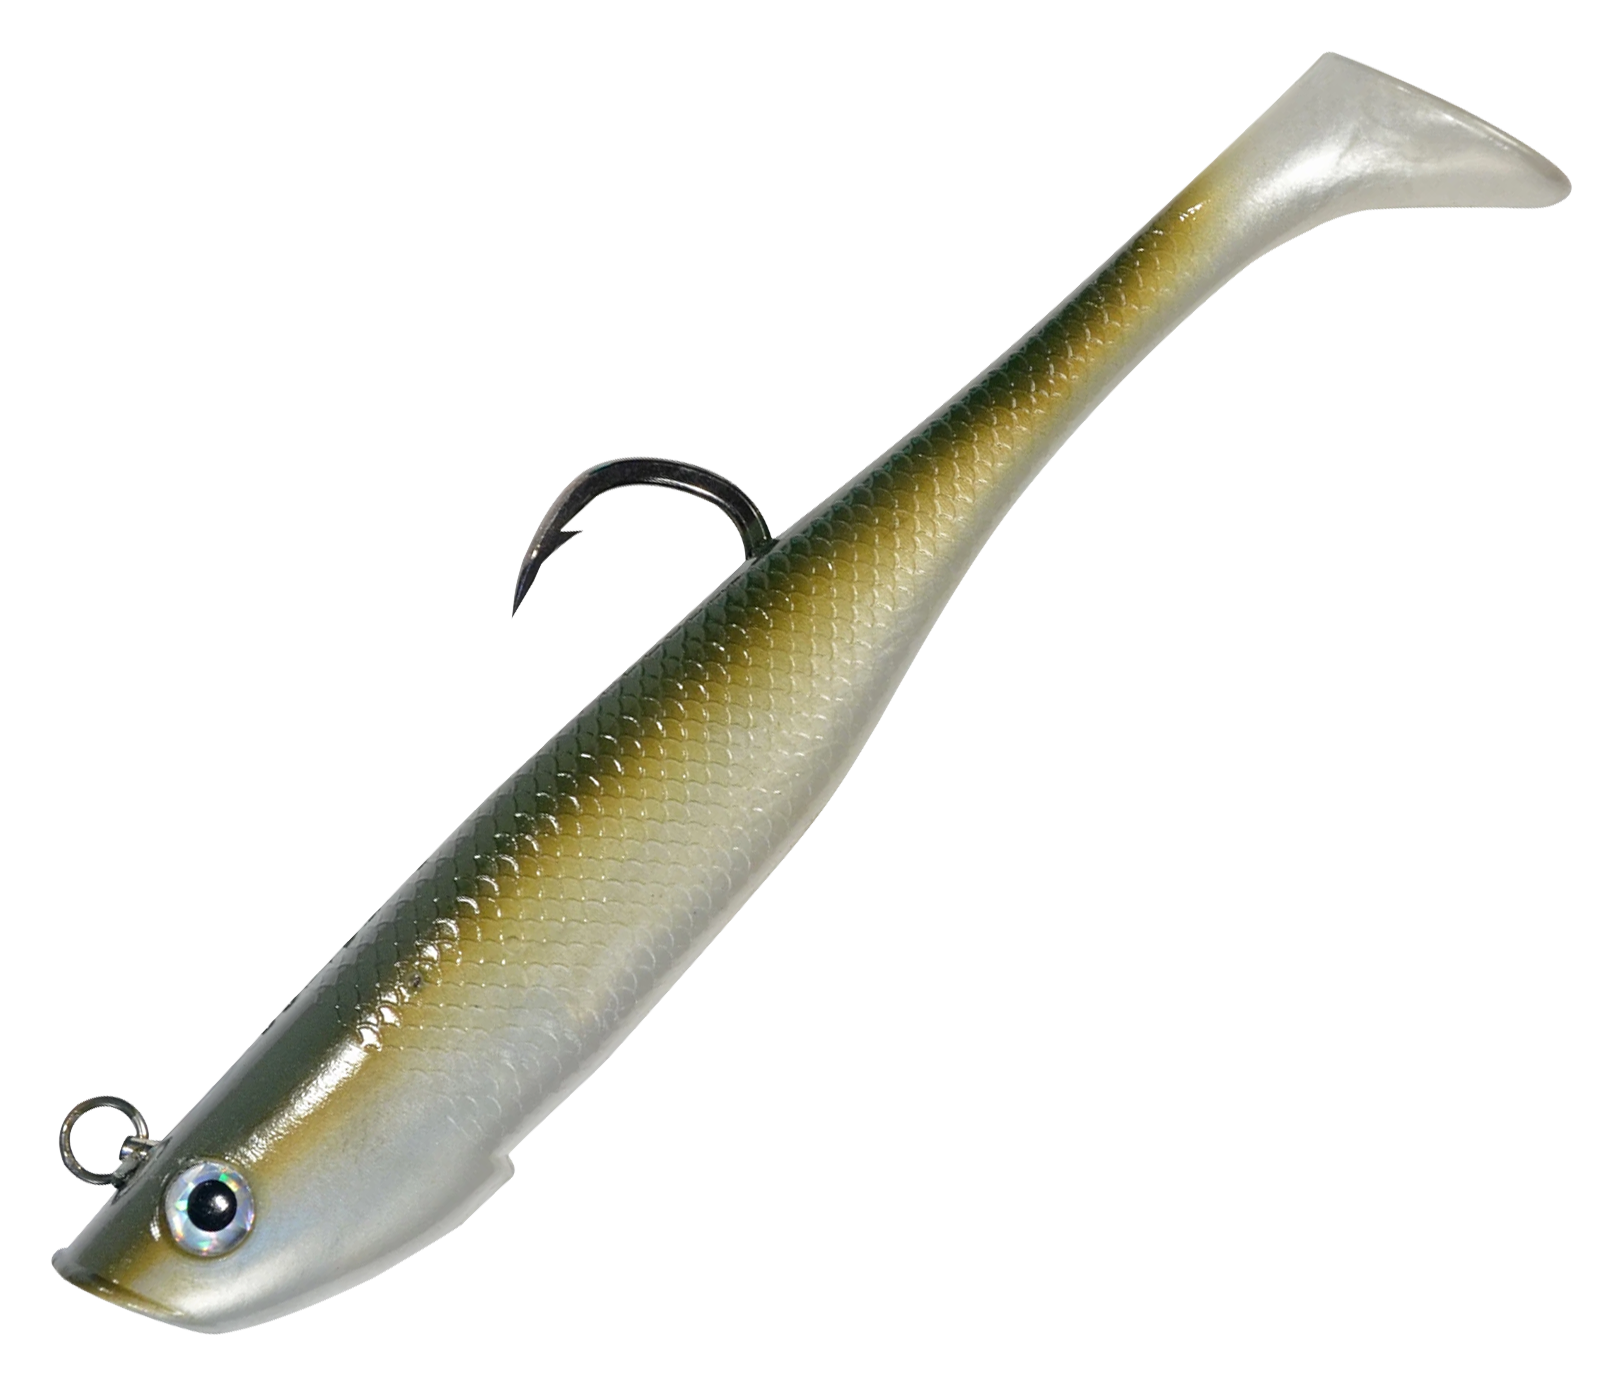 Whip-It Eel : Rigged – Al Gags Fishing Lures